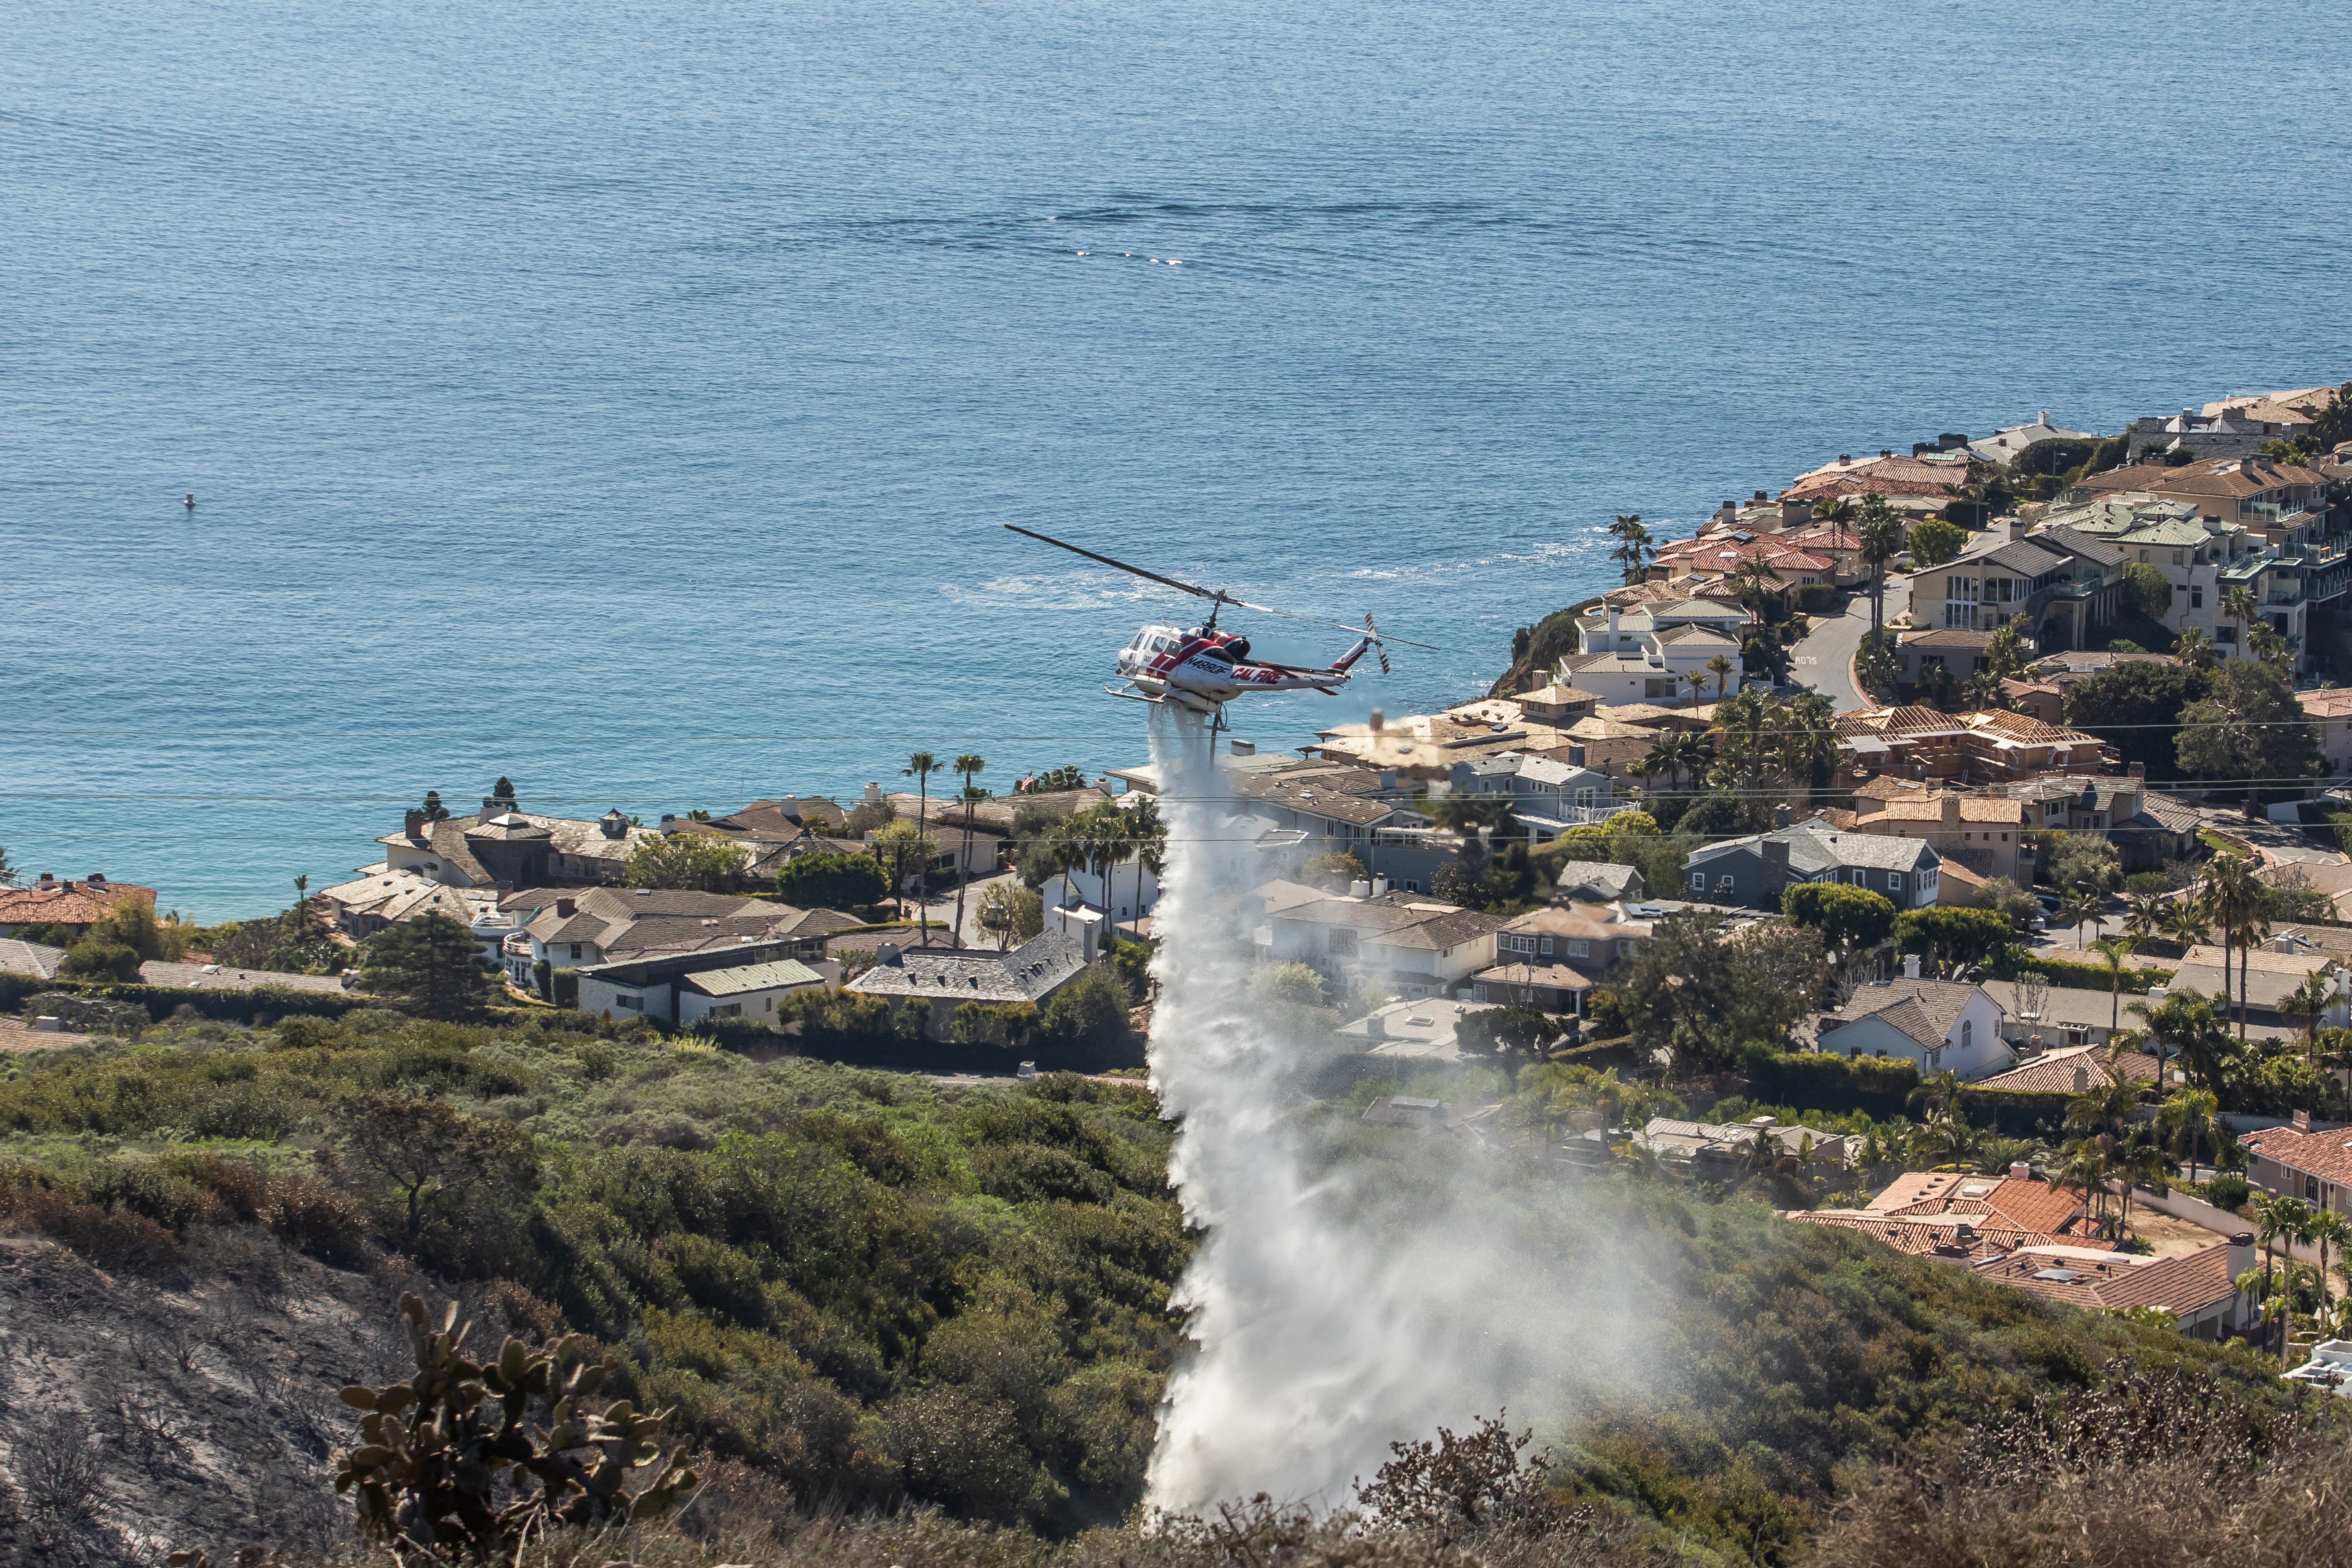 A helicopter drops water on a partially burnt hillside, which overlooks the ocean. Large, evacuated houses are situated nearby the burnt area. 